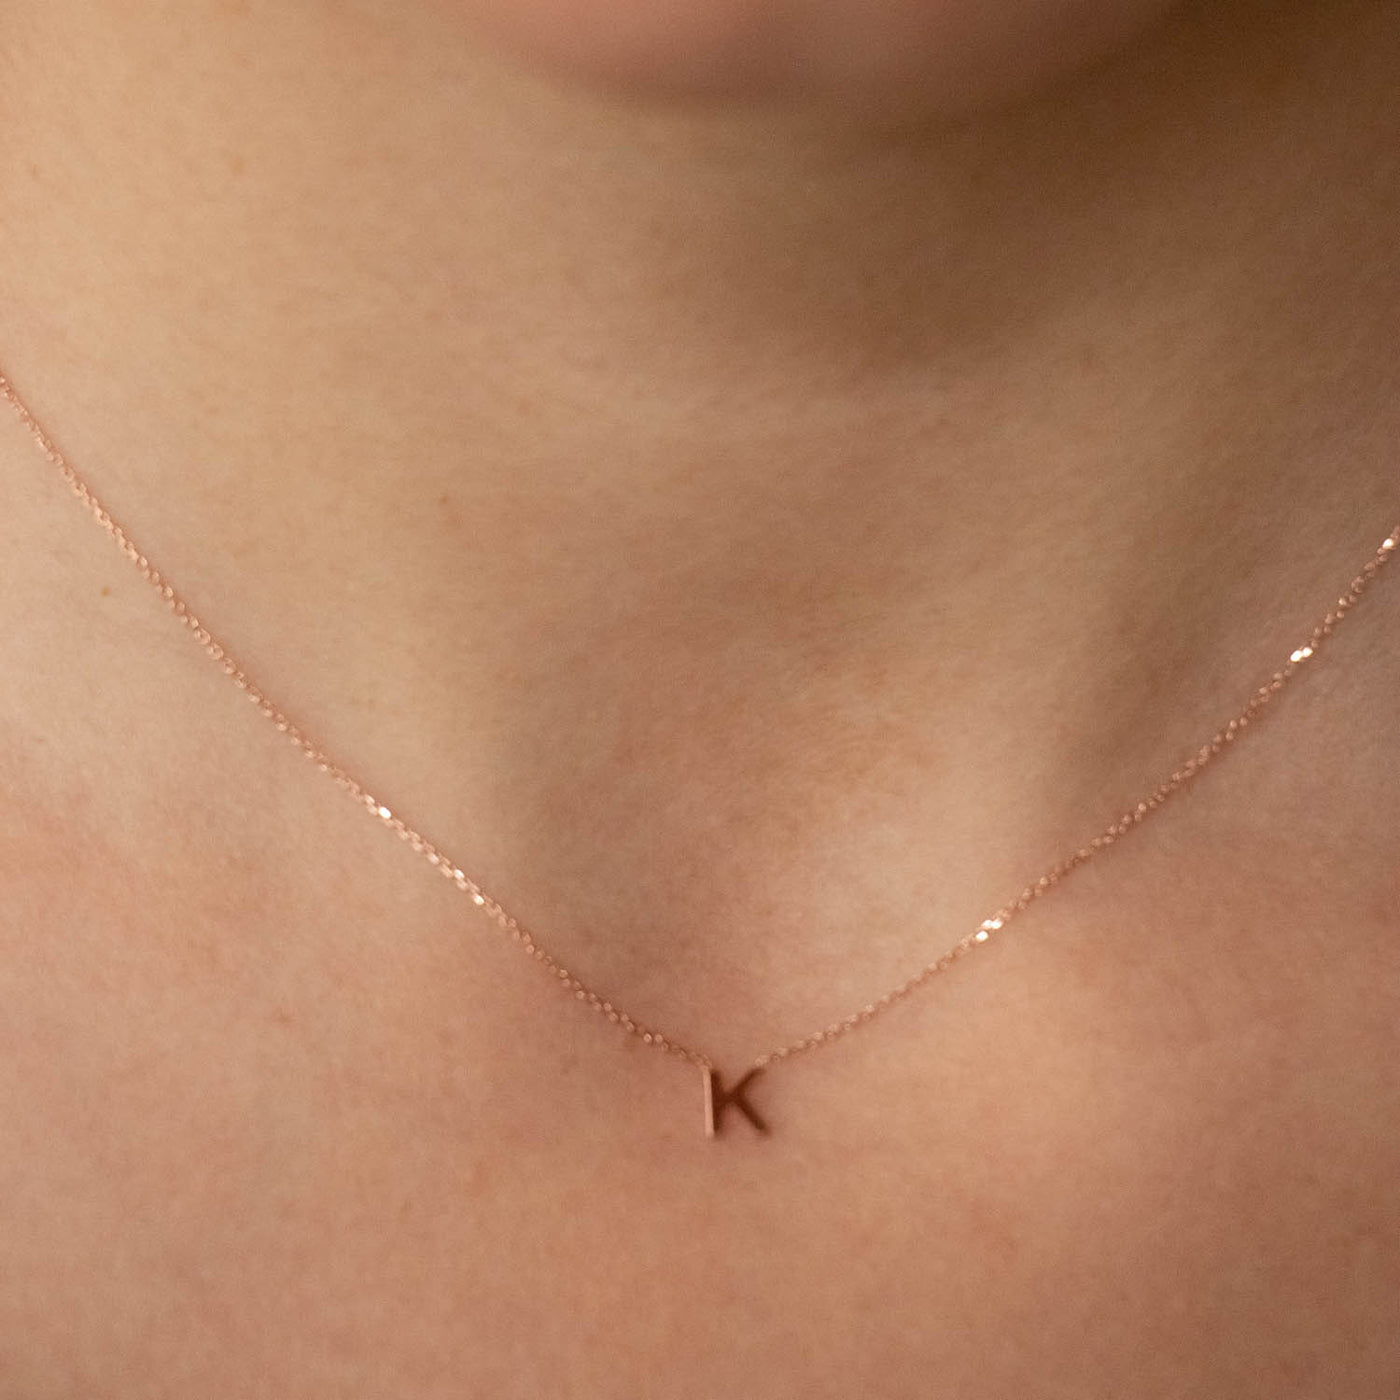 9ct Rose Gold Dainty Initial H Necklace